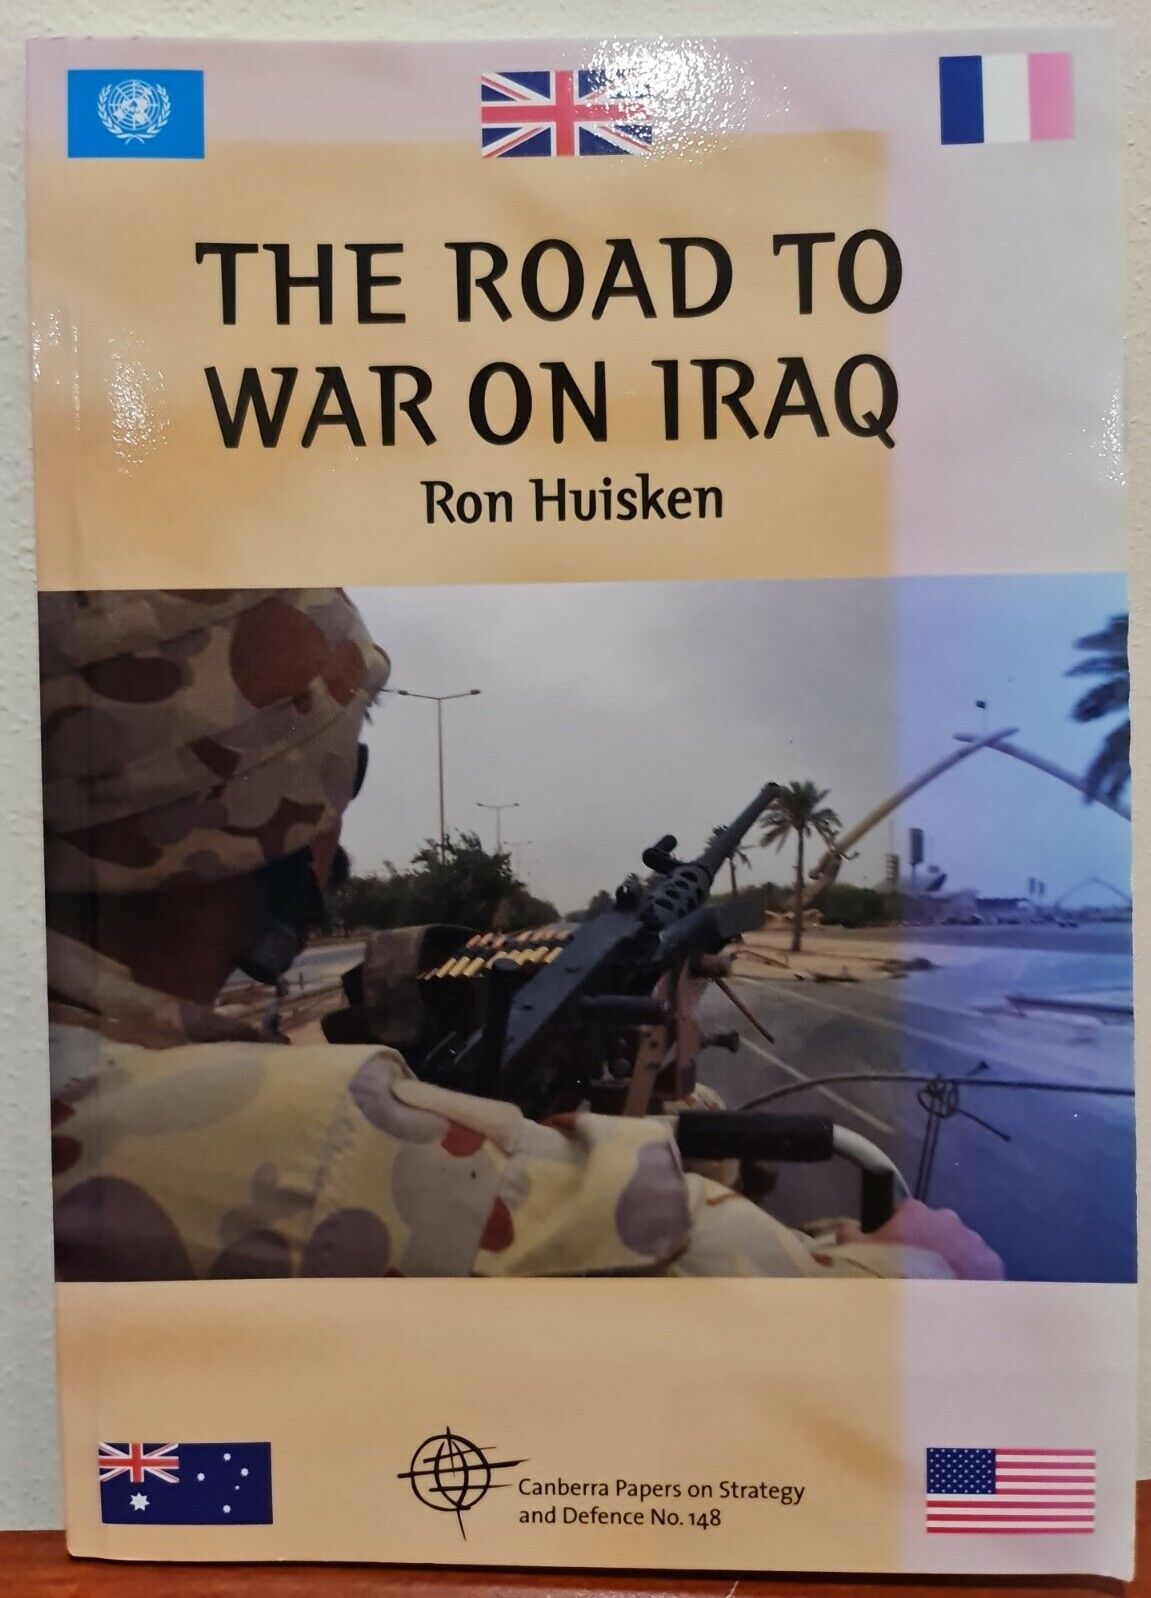 The Road to War on Iraq by Ron Huisken